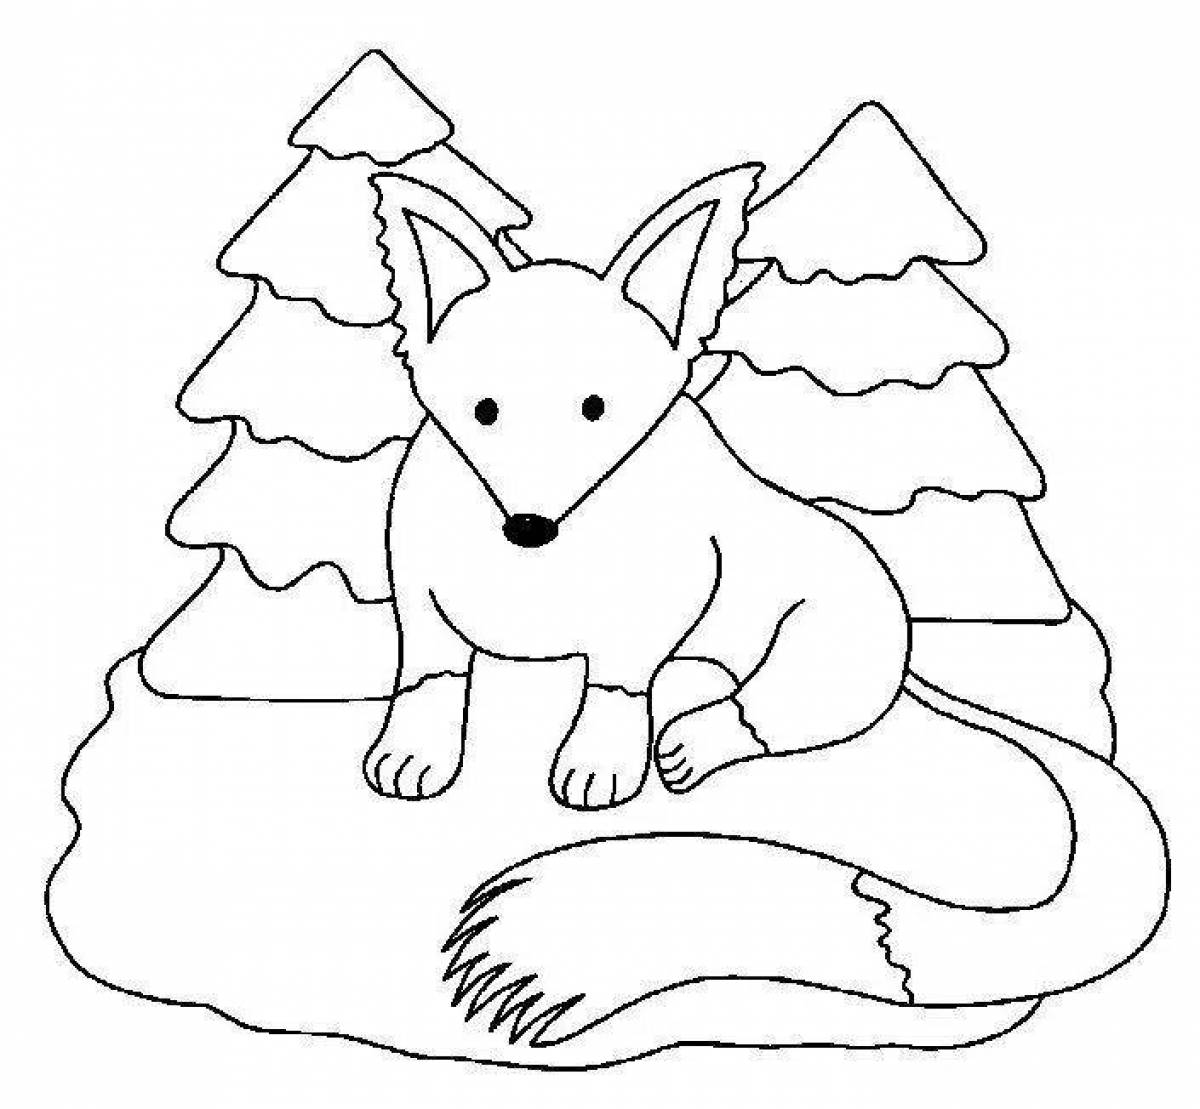 Coloring pages for children wild animals in winter